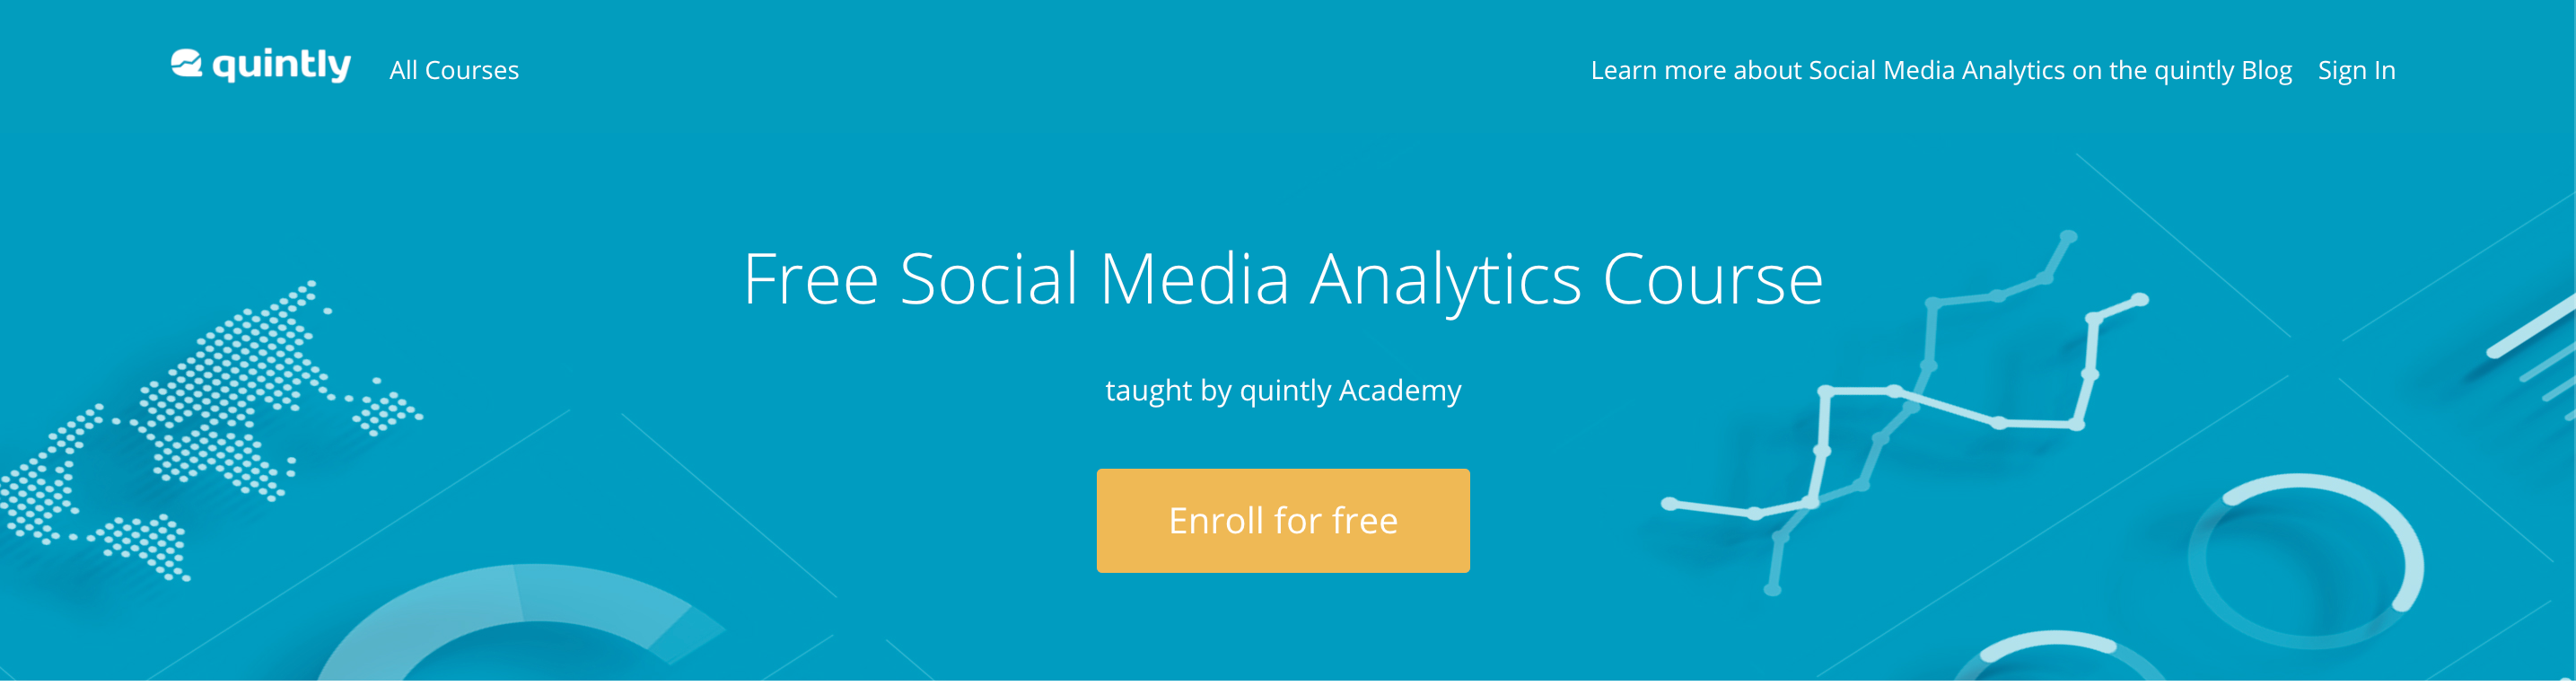 Quintly Social Media Analytics Course